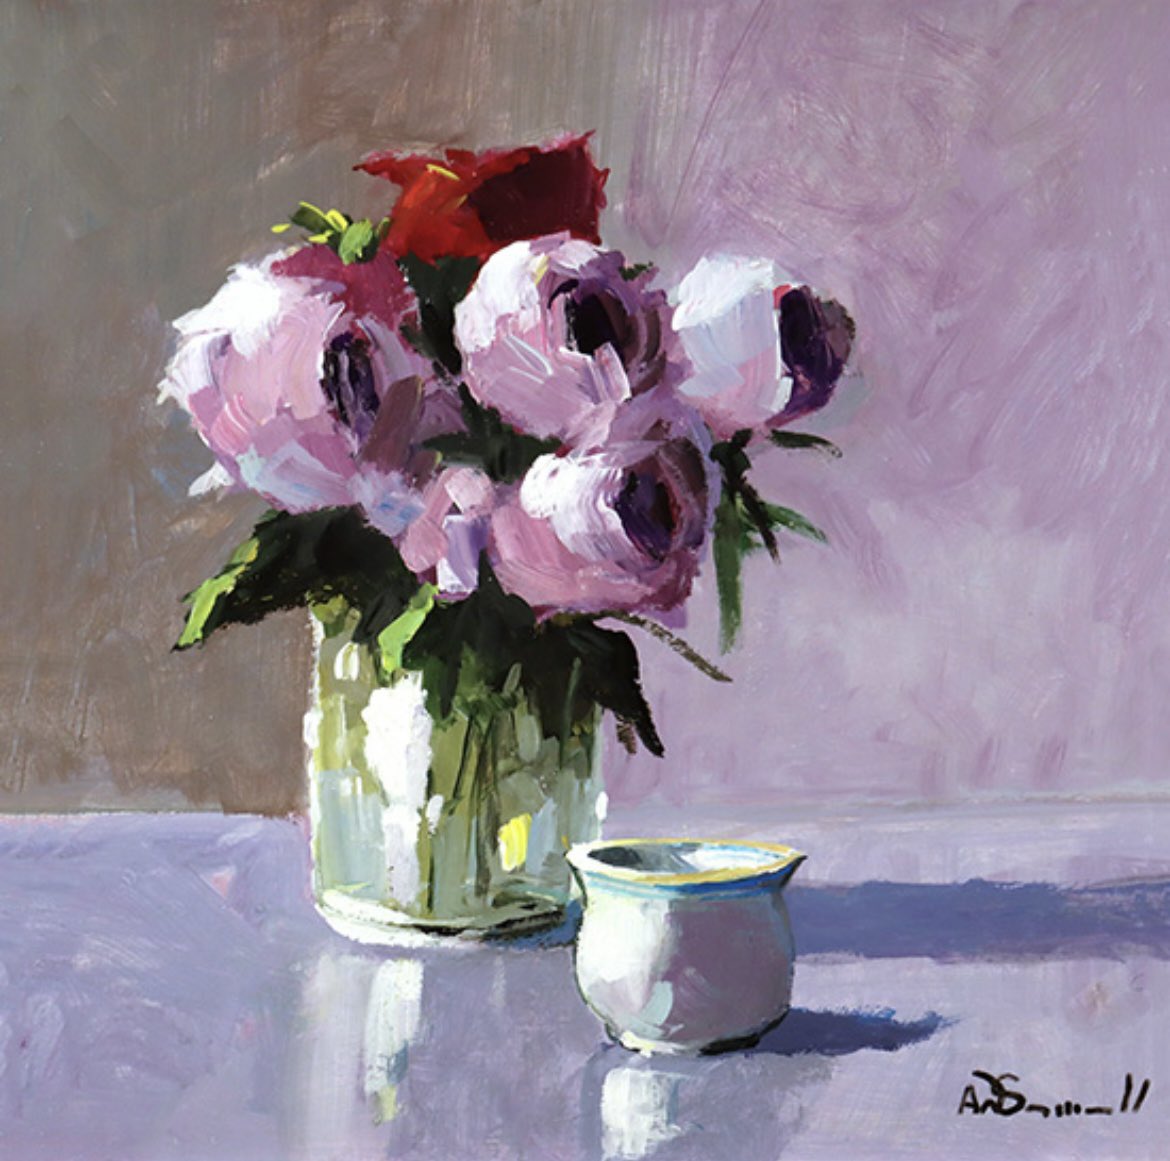 For maternal love in all it’s abundant and many varied forms, we wish you a very happy Mothering Sunday, however you choose to spend it 💐 Alan Smith’s simply lovely ‘Spring Posy’ is now available to view in our York gallery and on our website. #mothersday #stilllife #fineart